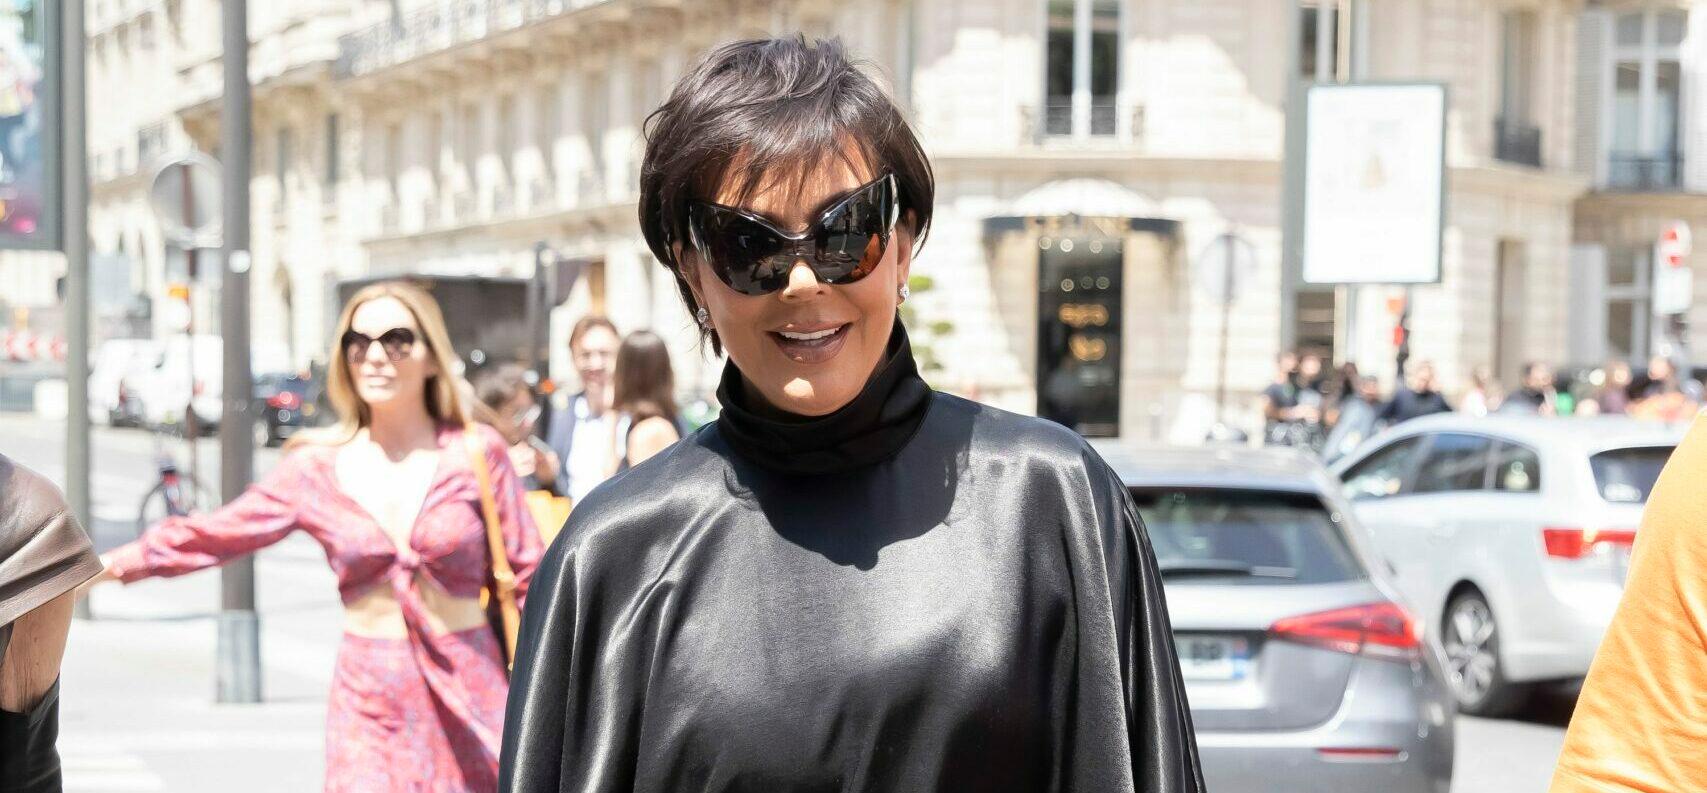 Kris Jenner leaving Restaurant L apos avenue and go to Dior Shop during Paris Fashion Week